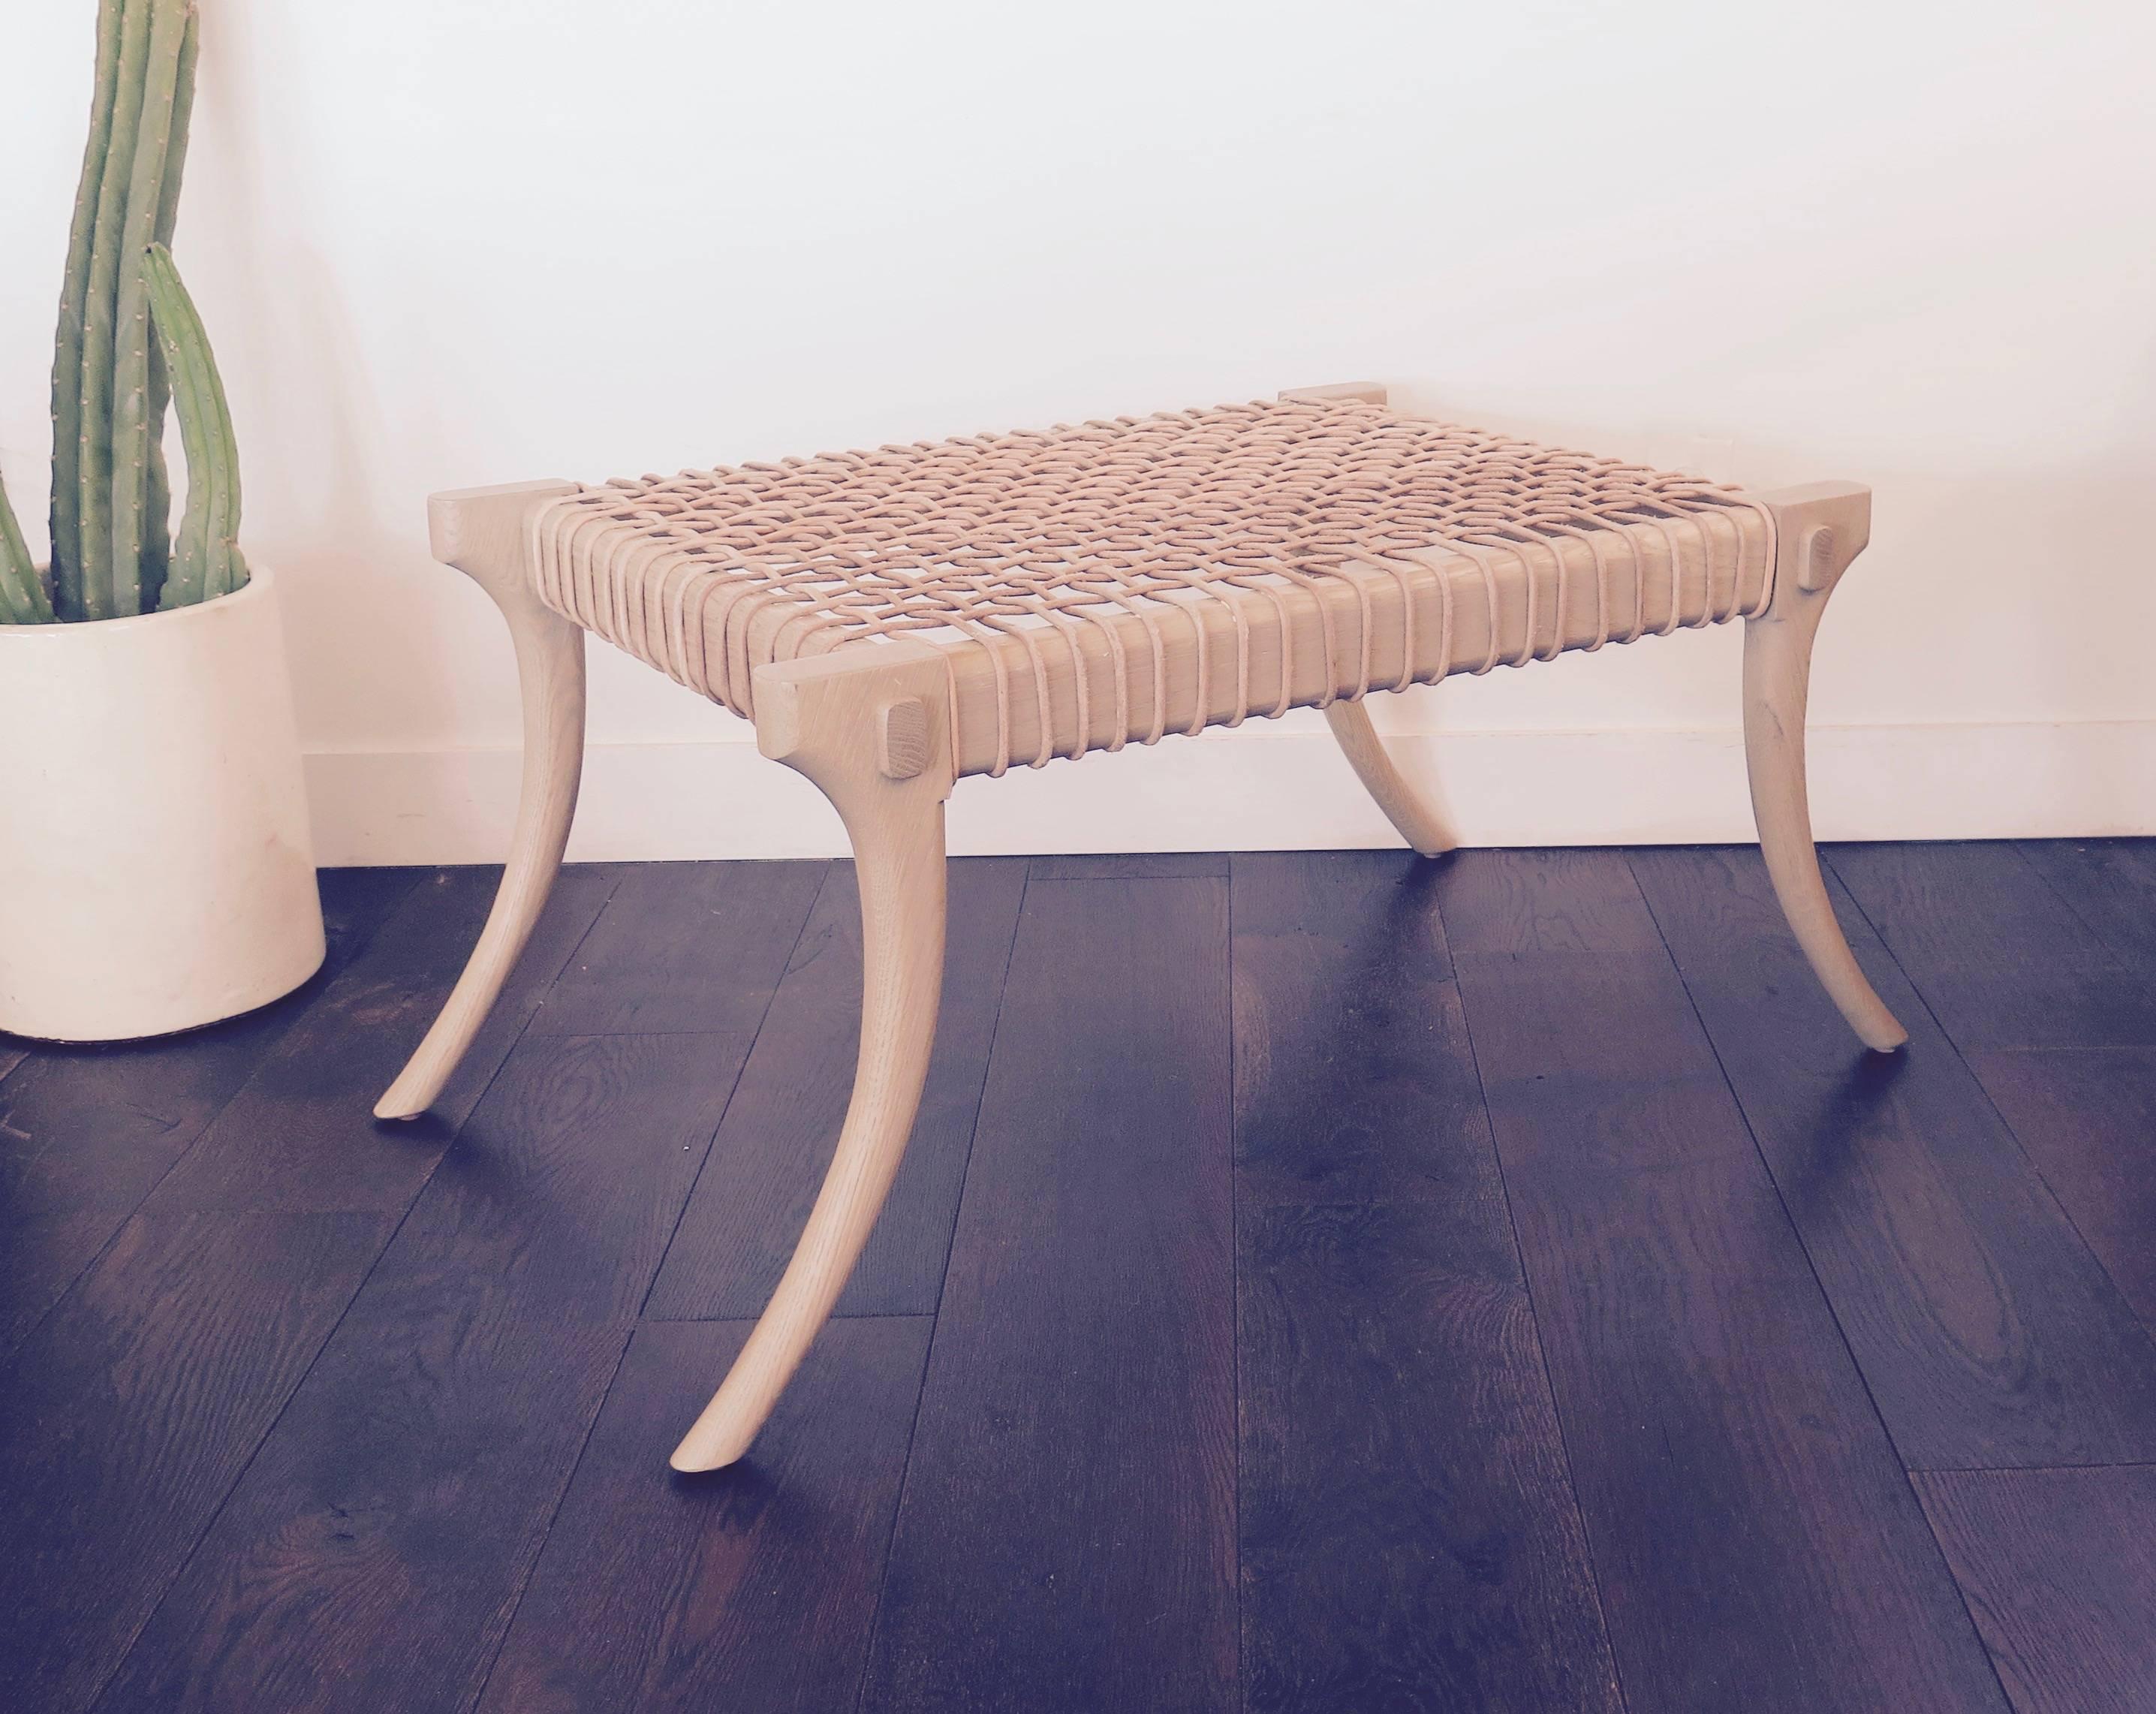 Lola bench in white oak with leather cord.